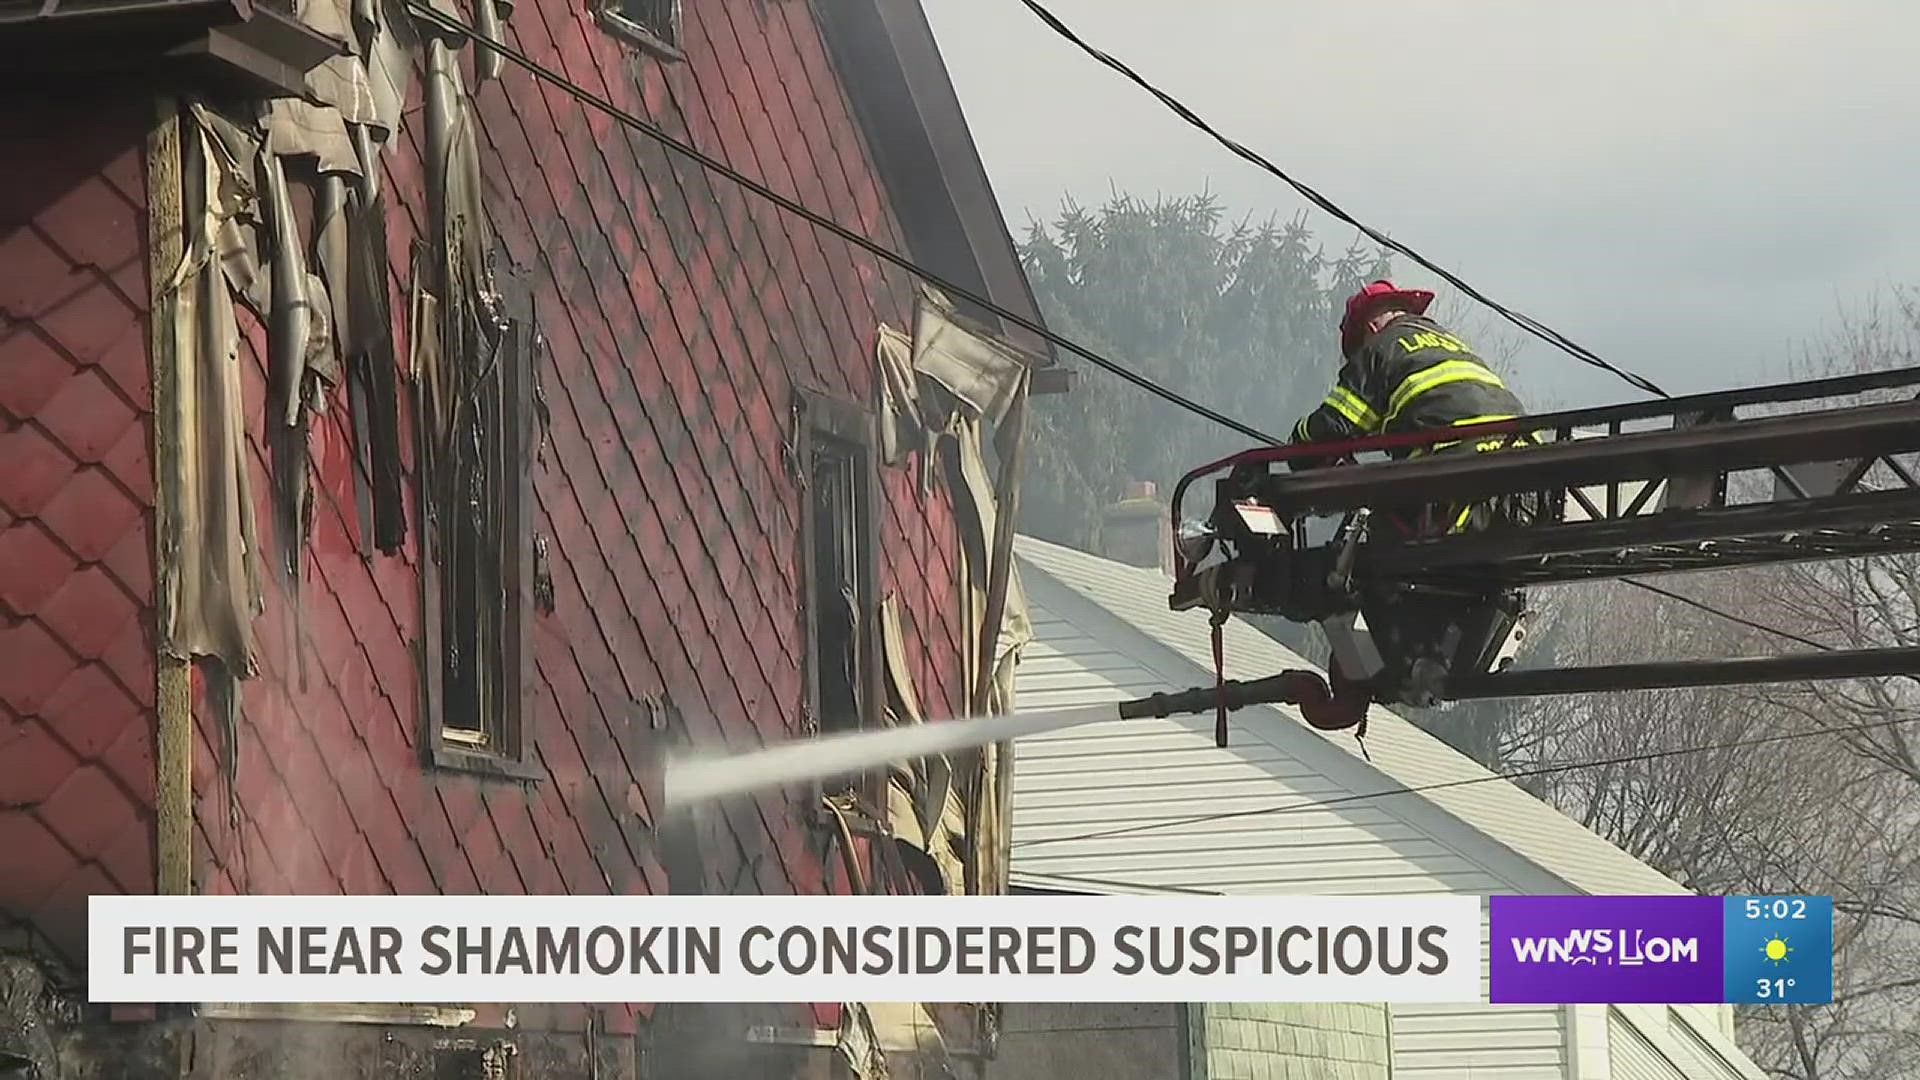 Authorities think someone may have torched the home near Shamokin on Monday.